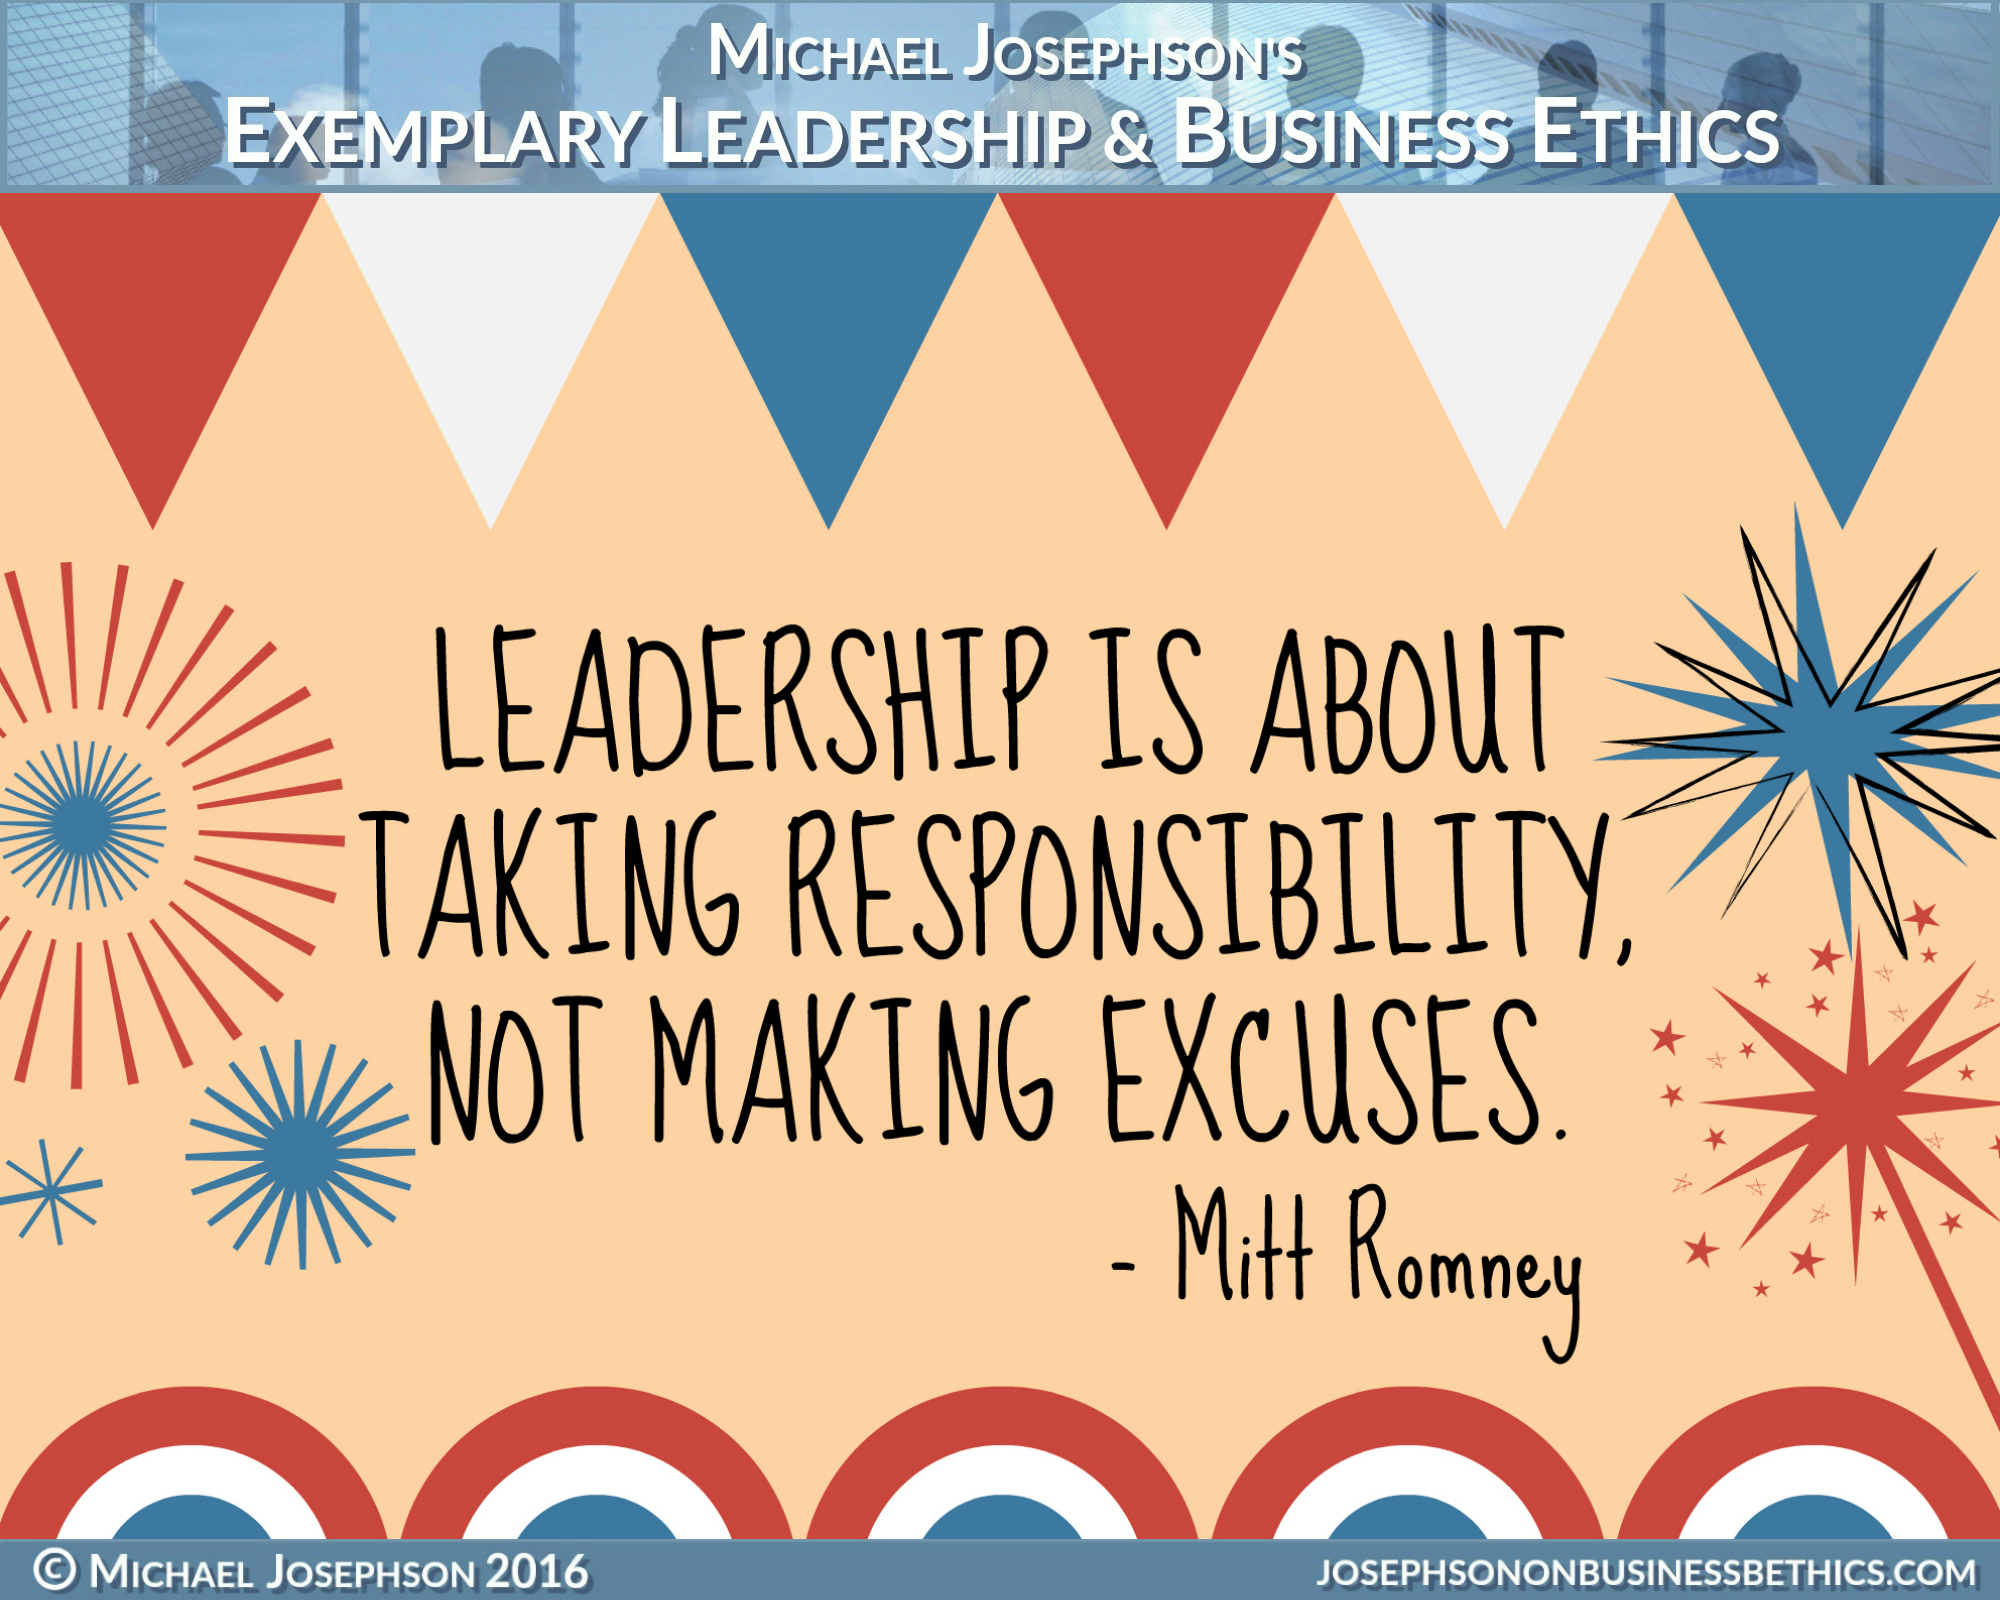 BEST EVER POSTER QUOTES ON LEADERSHIP - Exemplary Business Ethics